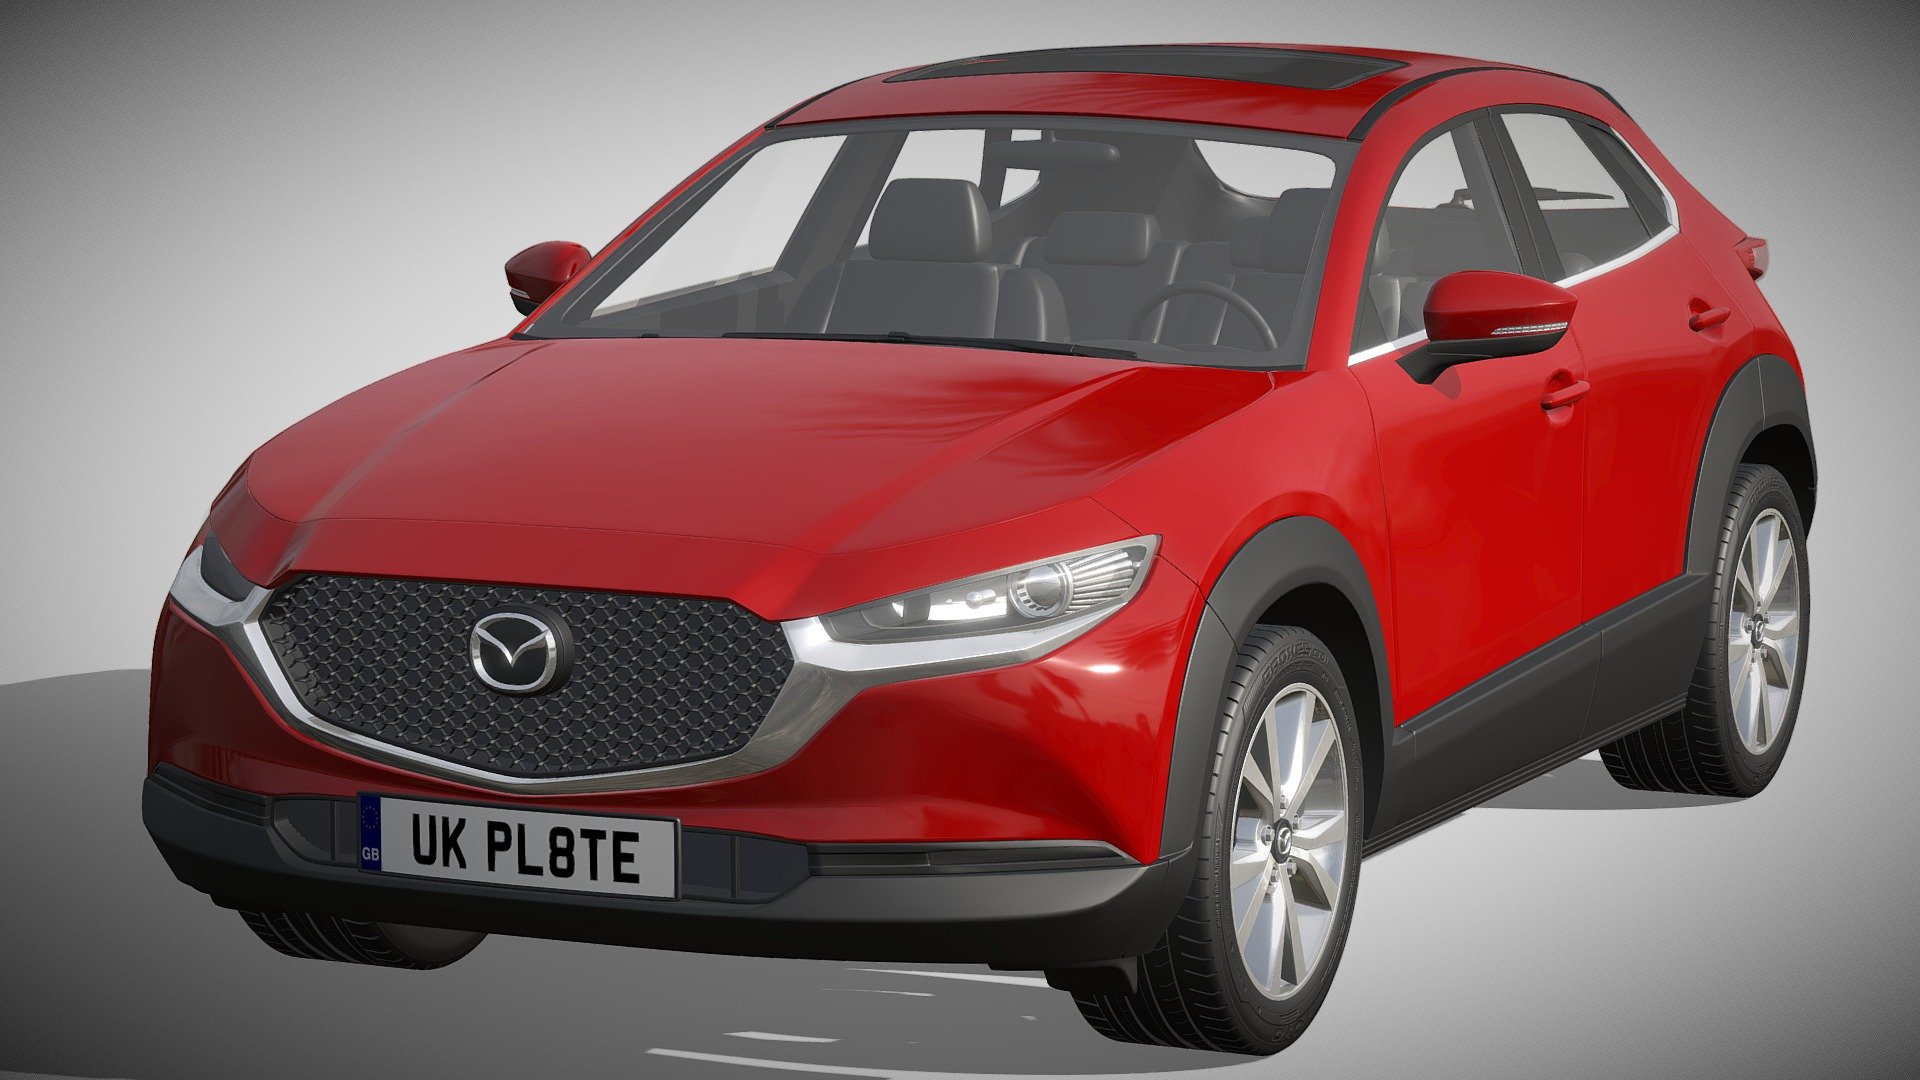 Mazda CX-30

https://mazda.ua/cars/mazda-cx-30/

Clean geometry Light weight model, yet completely detailed for HI-Res renders. Use for movies, Advertisements or games

Corona render and materials

All textures include in *.rar files

Lighting setup is not included in the file! - Mazda CX-30 - Buy Royalty Free 3D model by zifir3d 3d model